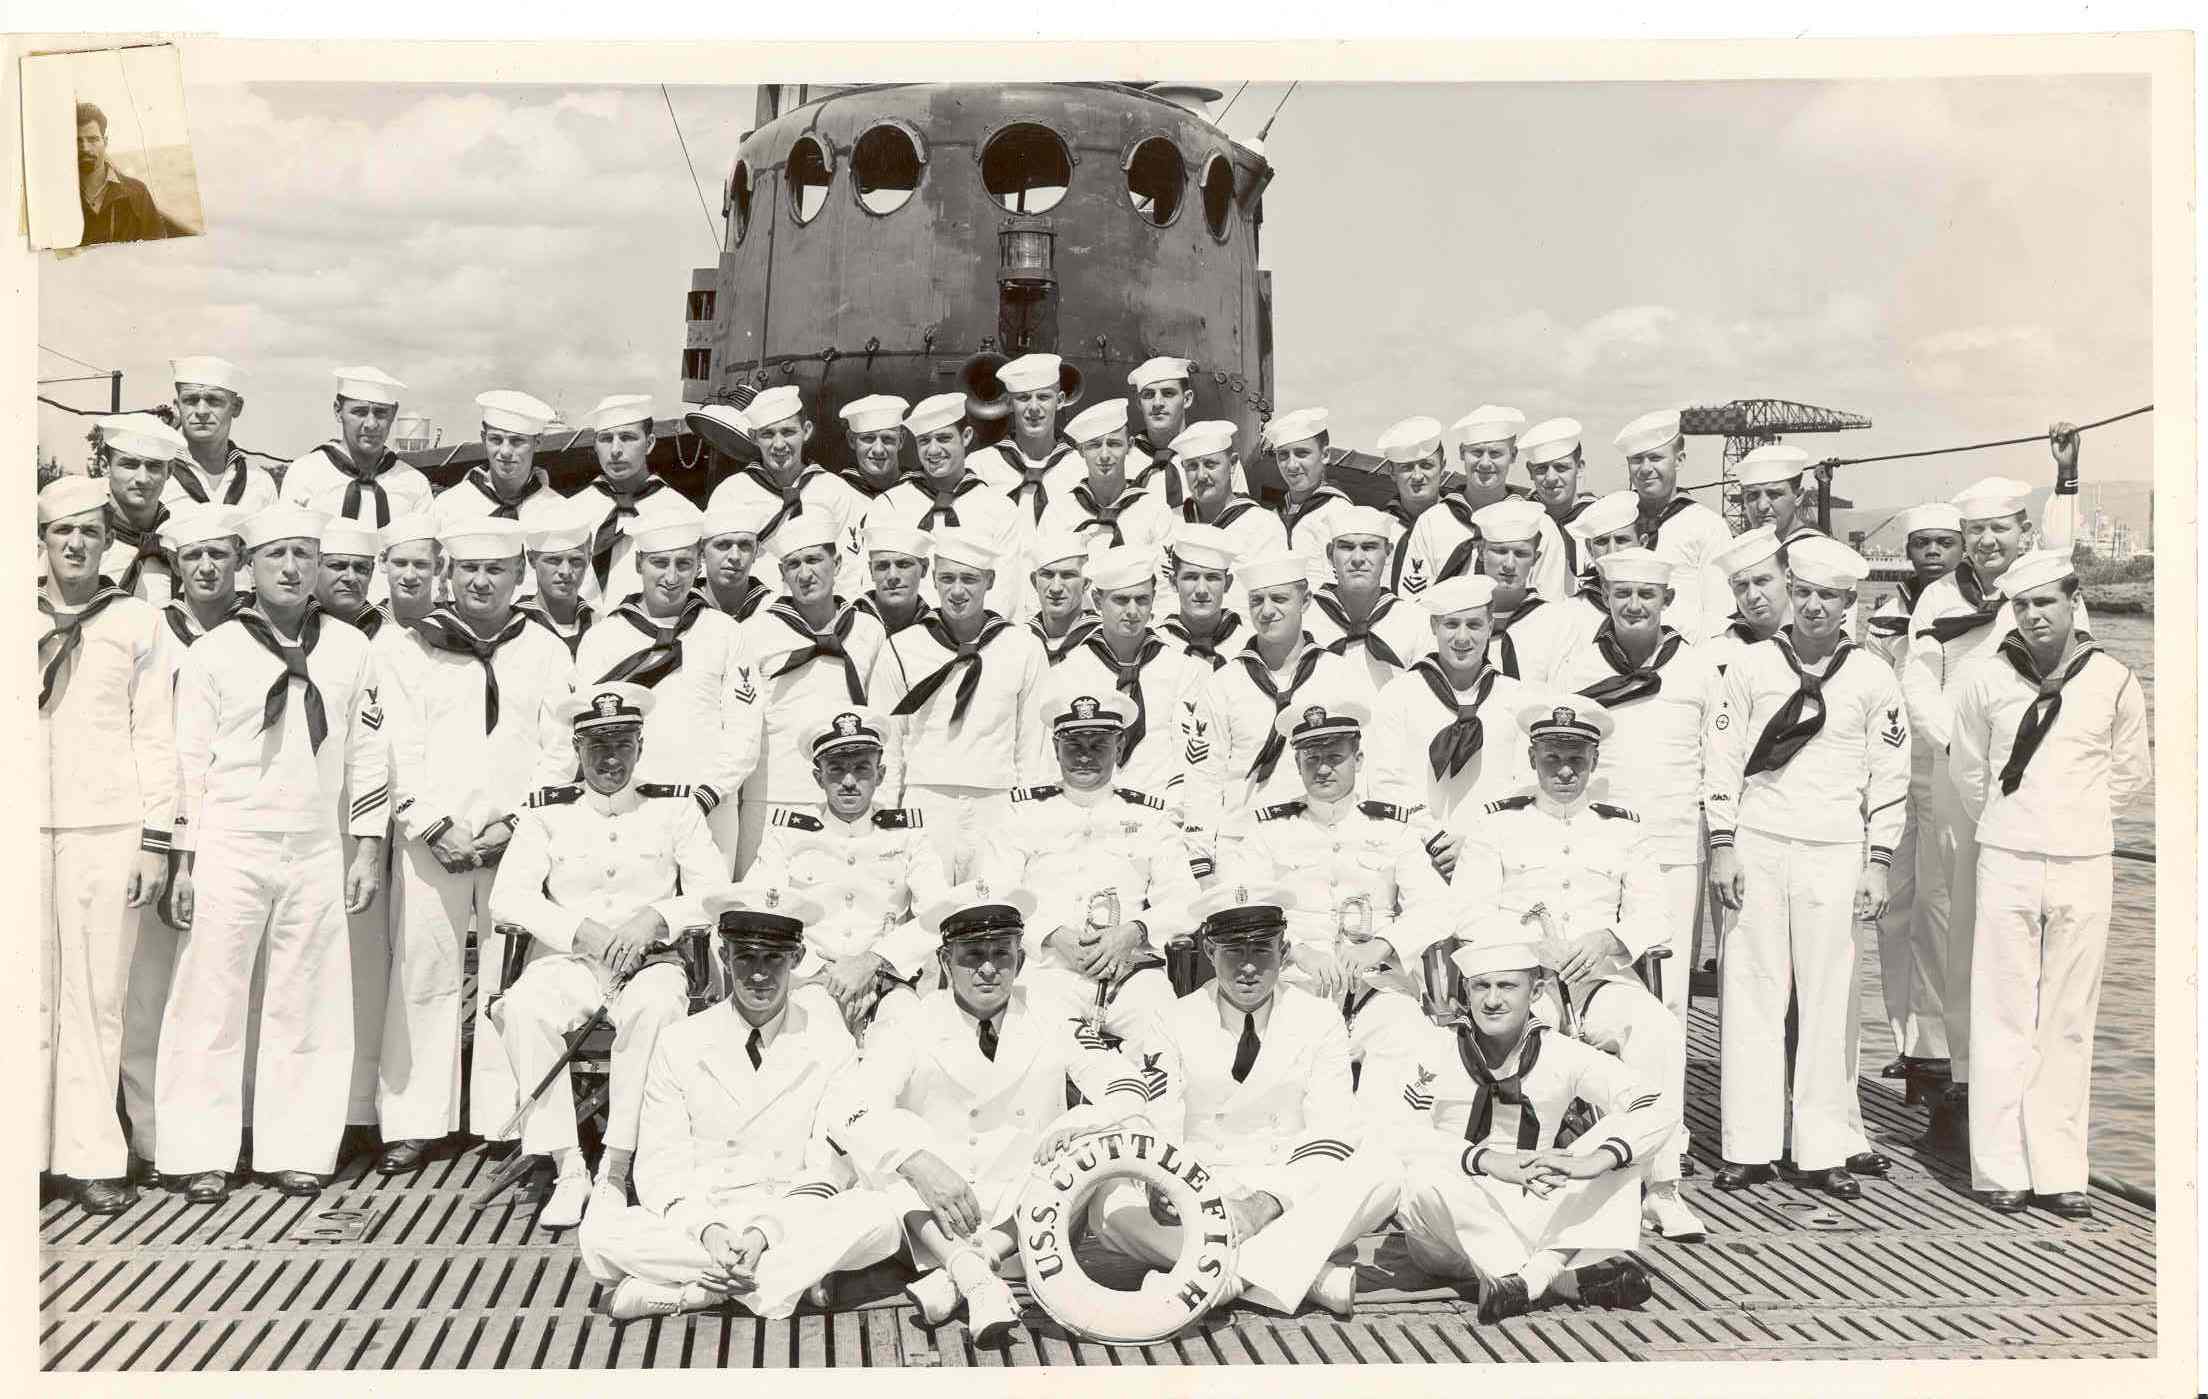 Officers and crew of submarine USS Cuttlefish, date unknown, photo 1 of 2